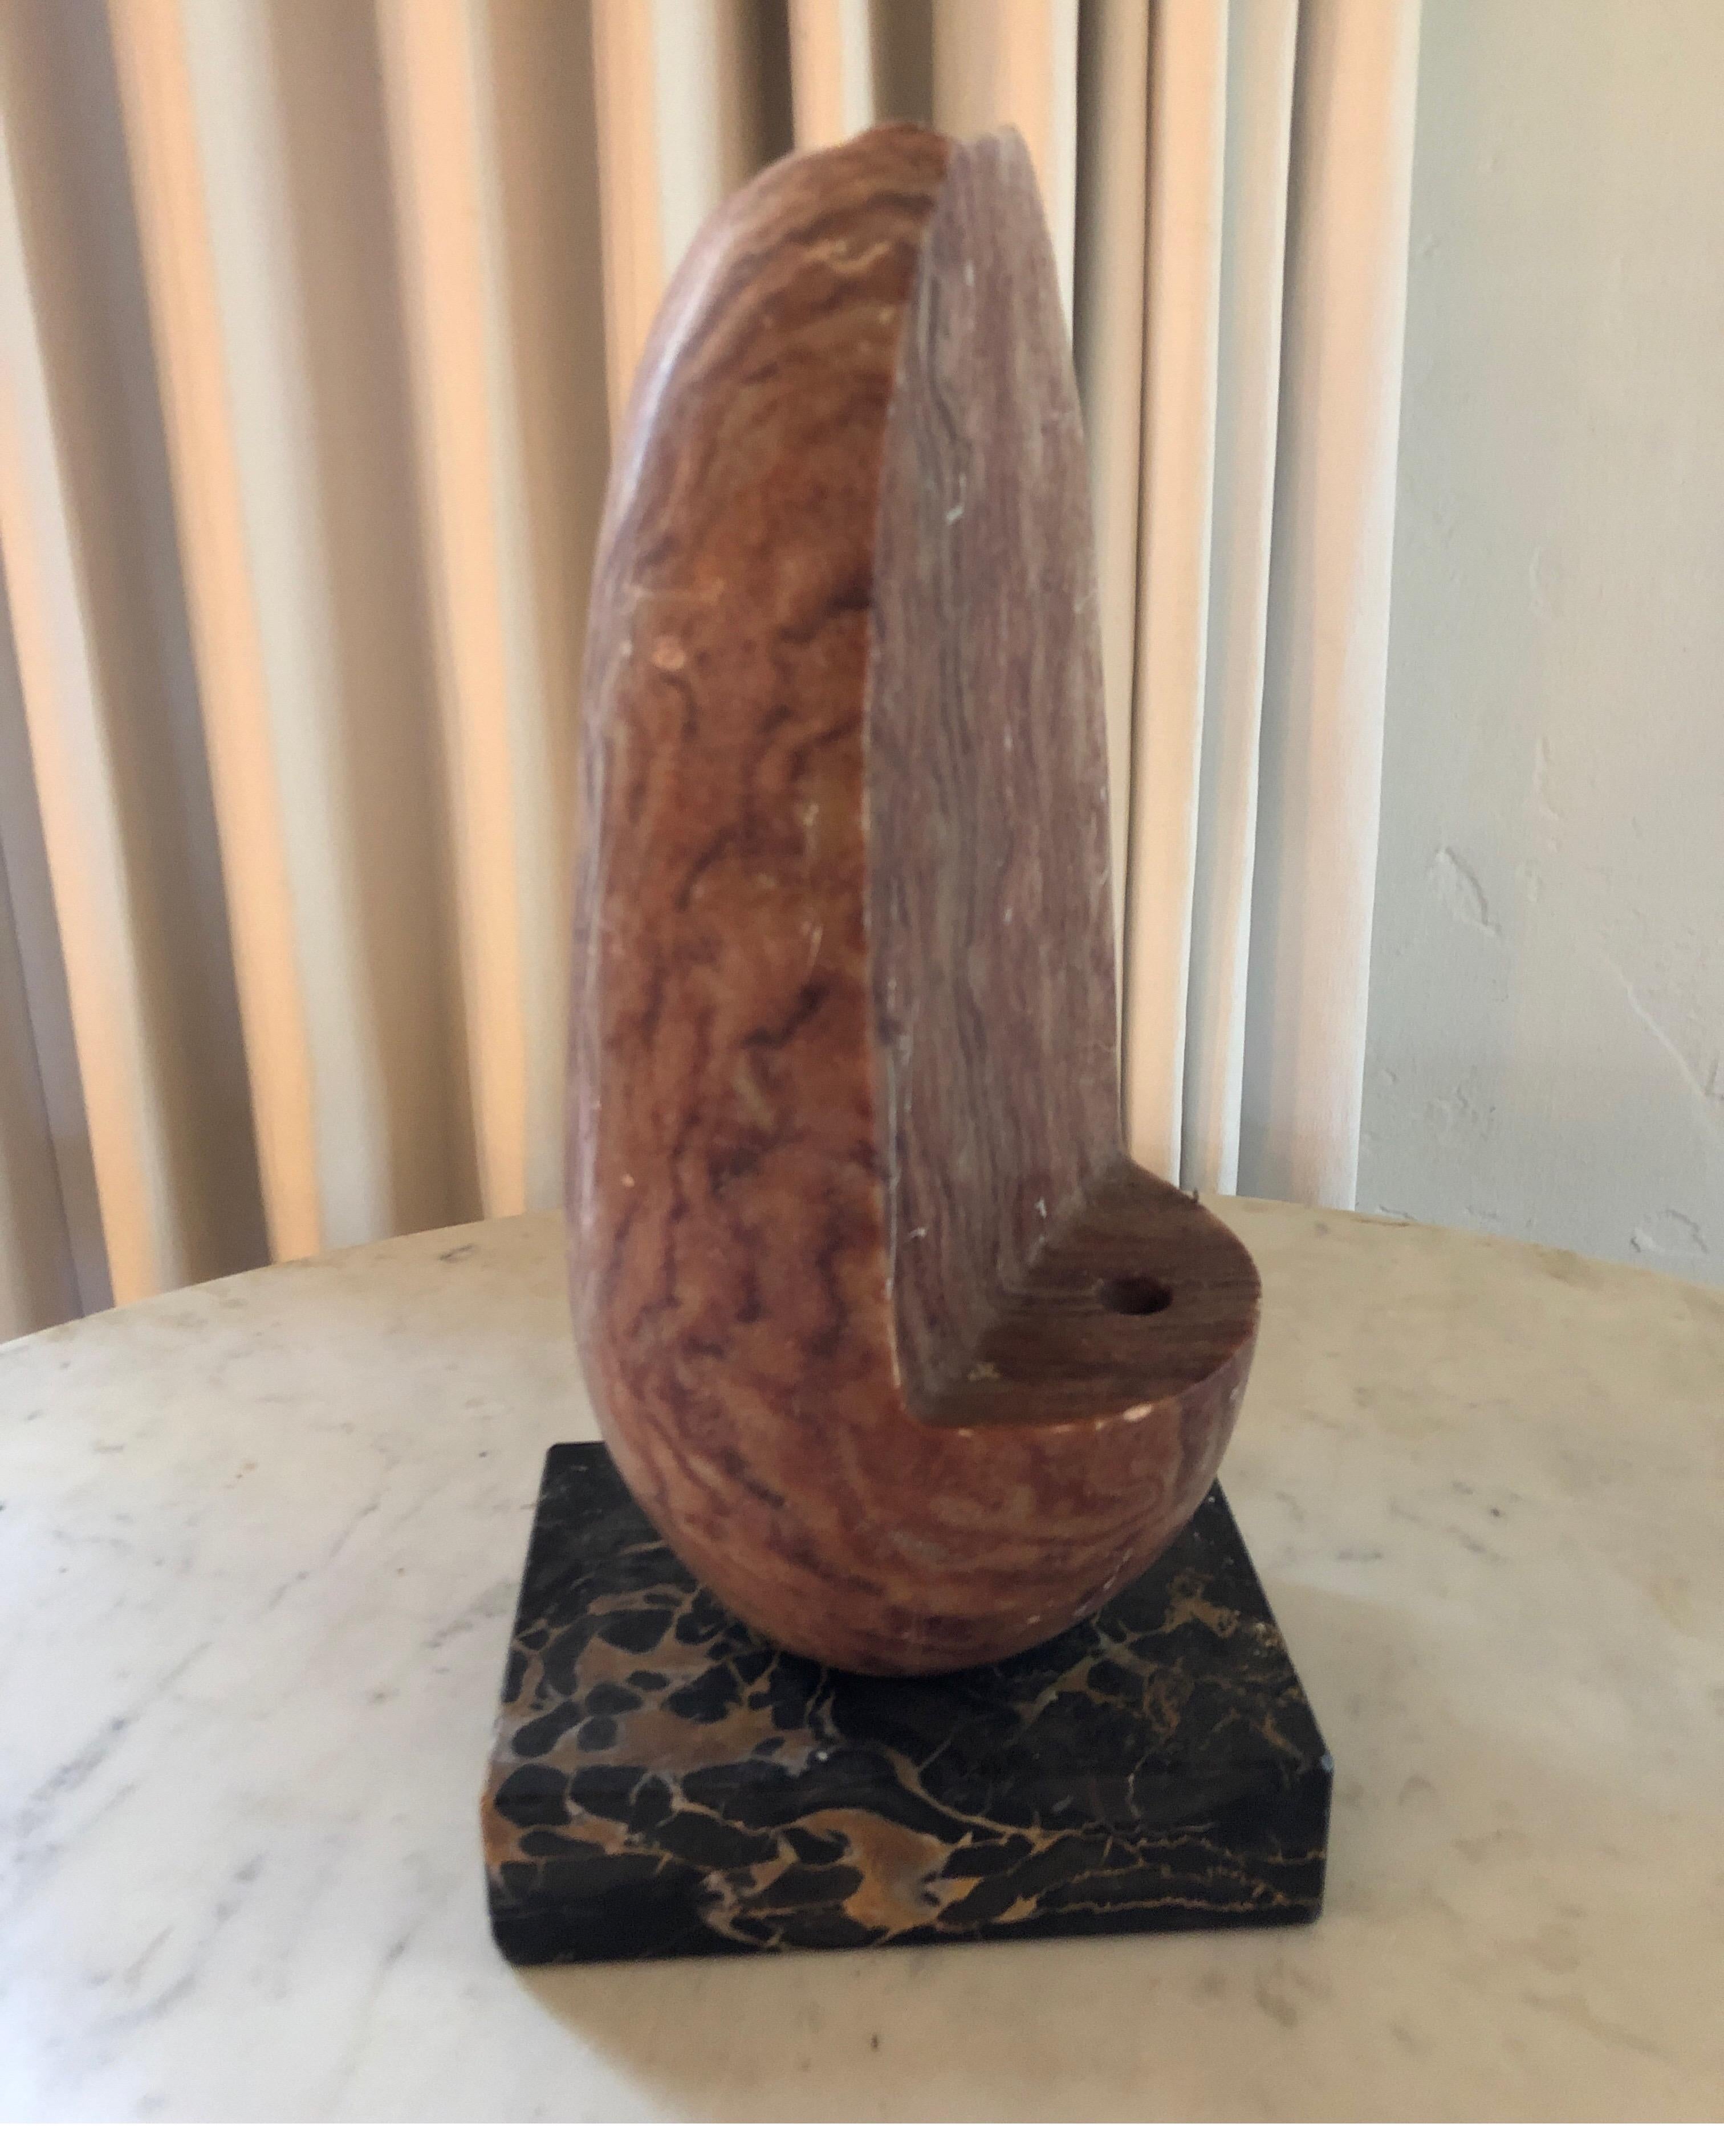 Signed stone sculpture on base.
American Artist Yehuda 